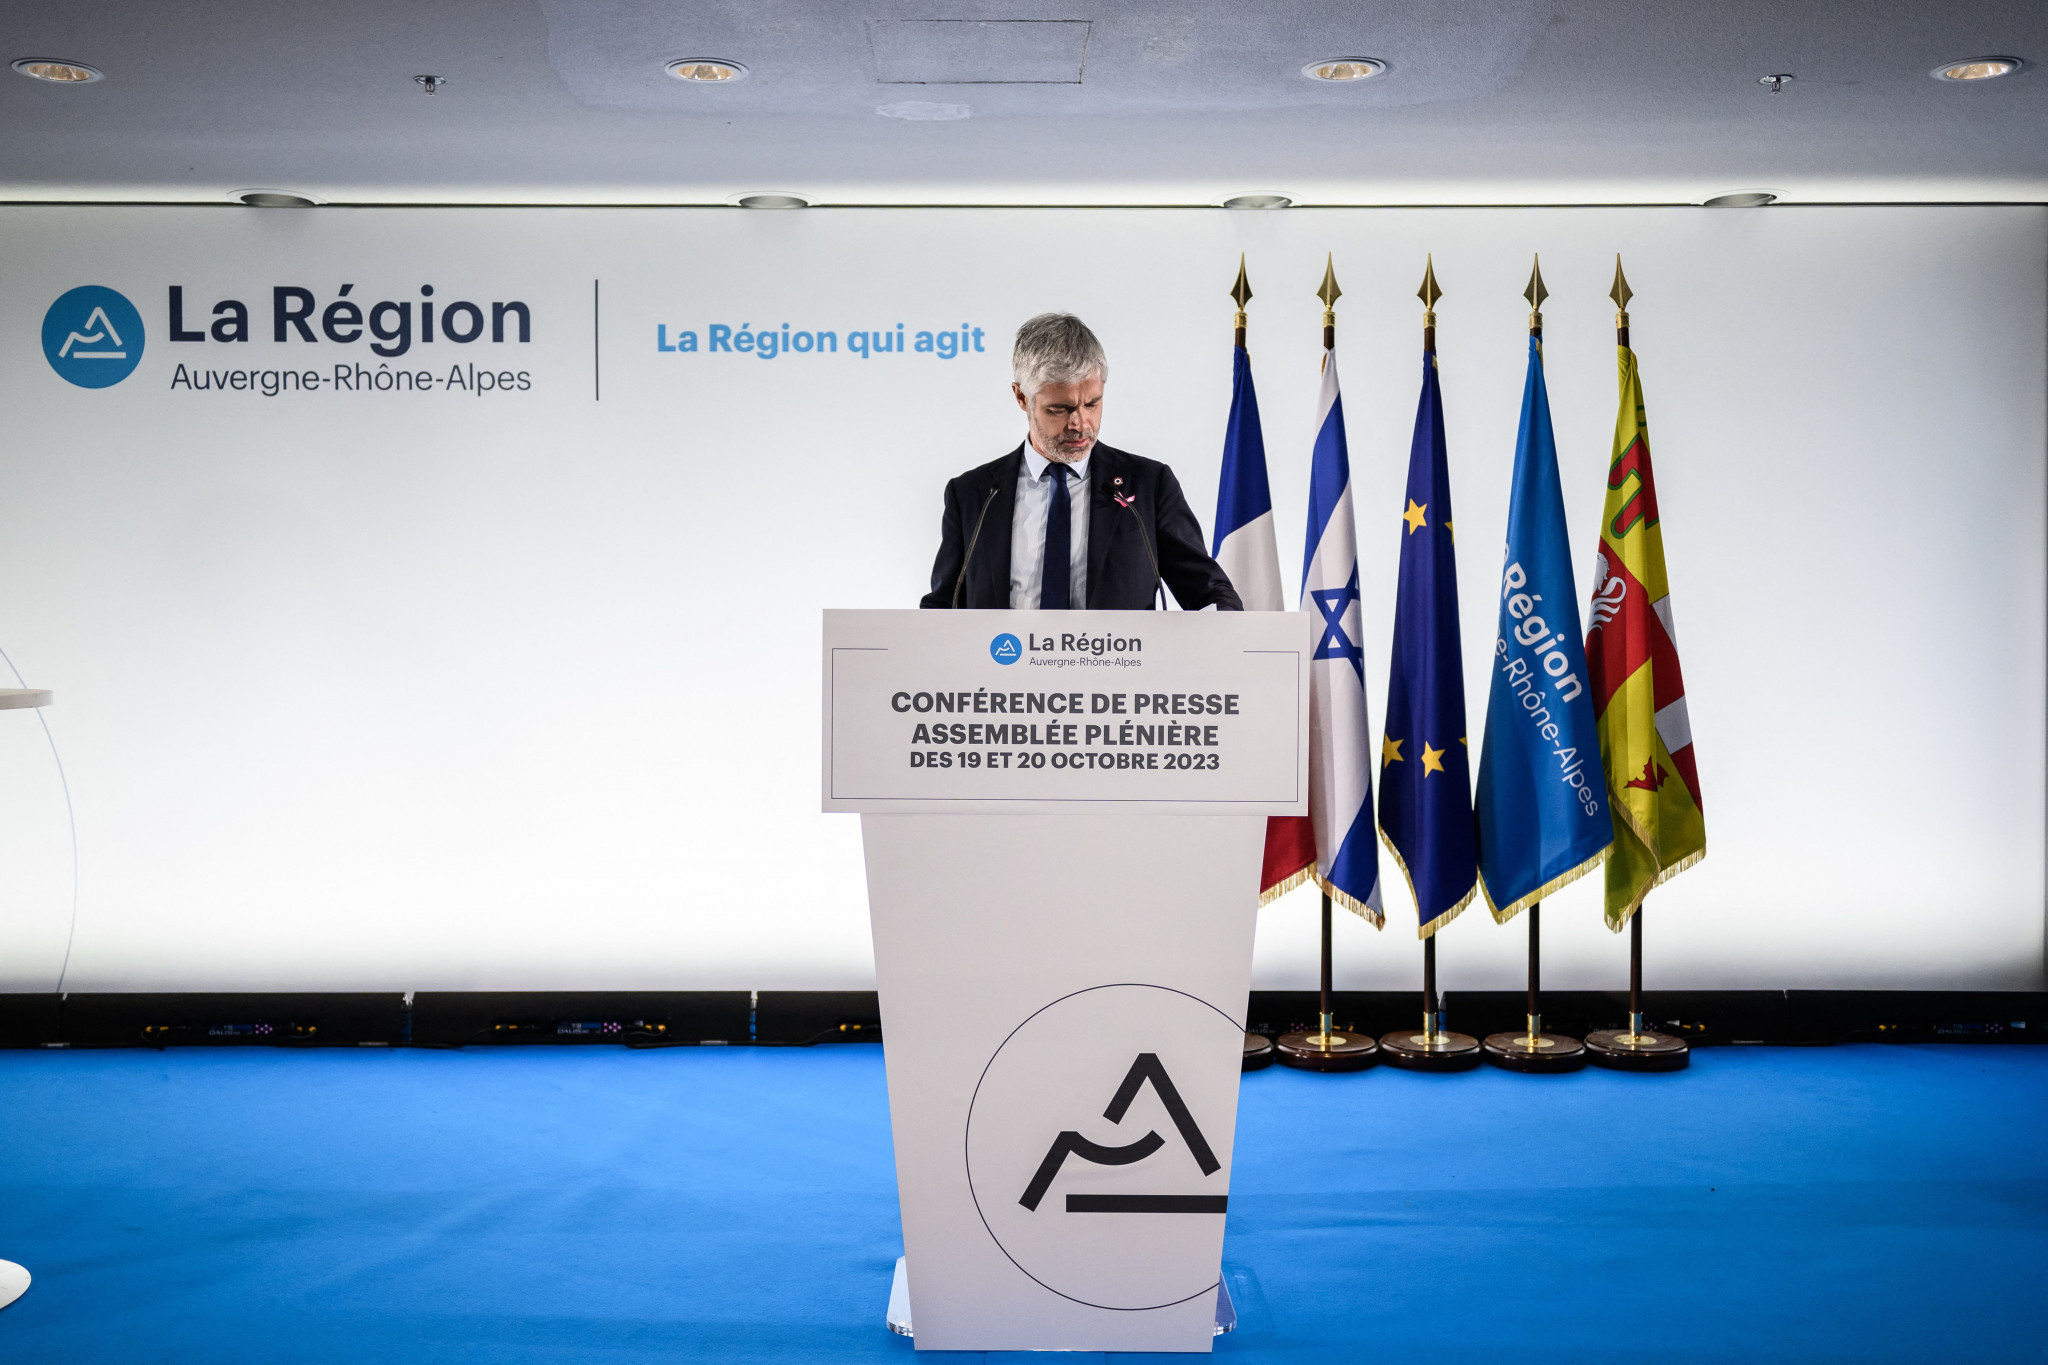 Auvergne-Rhône-Alpes President committed to hosting sustainable Winter Olympics